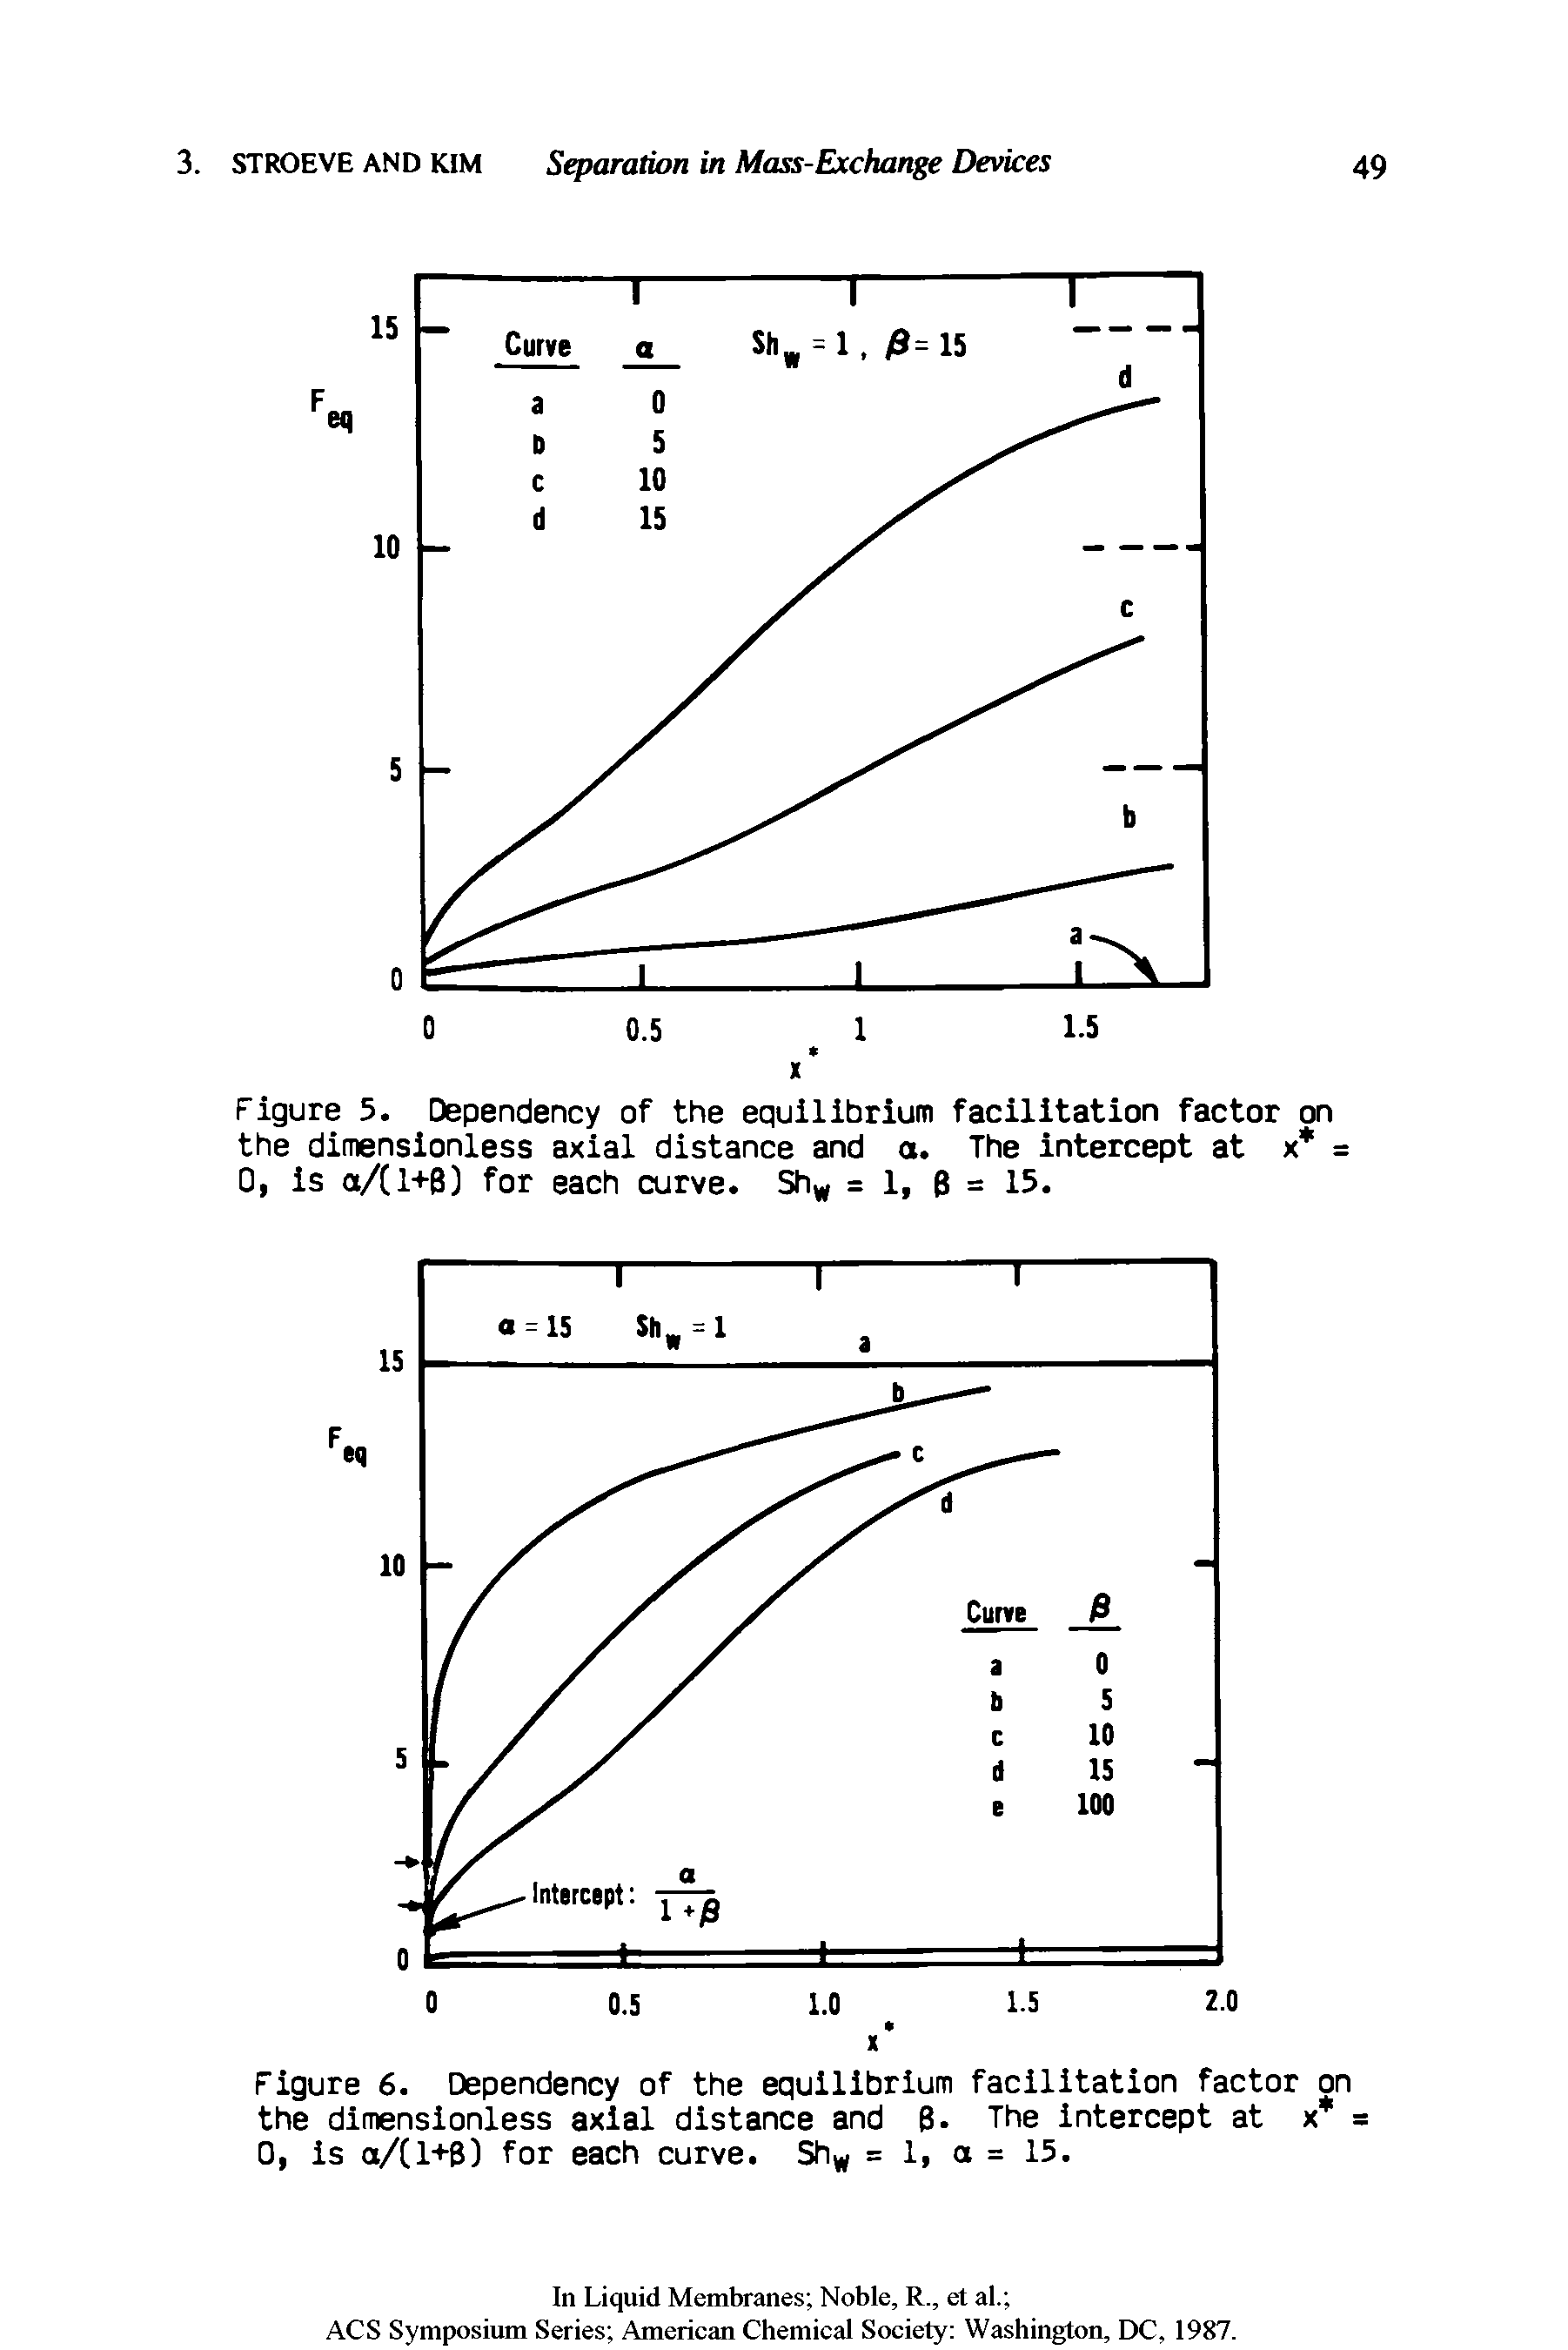 Figure 5. Dependency of the equilibrium facilitation factor on the dimensionless axial distance and a. The intercept at x = 0, is a/(l+B) for each curve. Sh, = 1, B = 15.